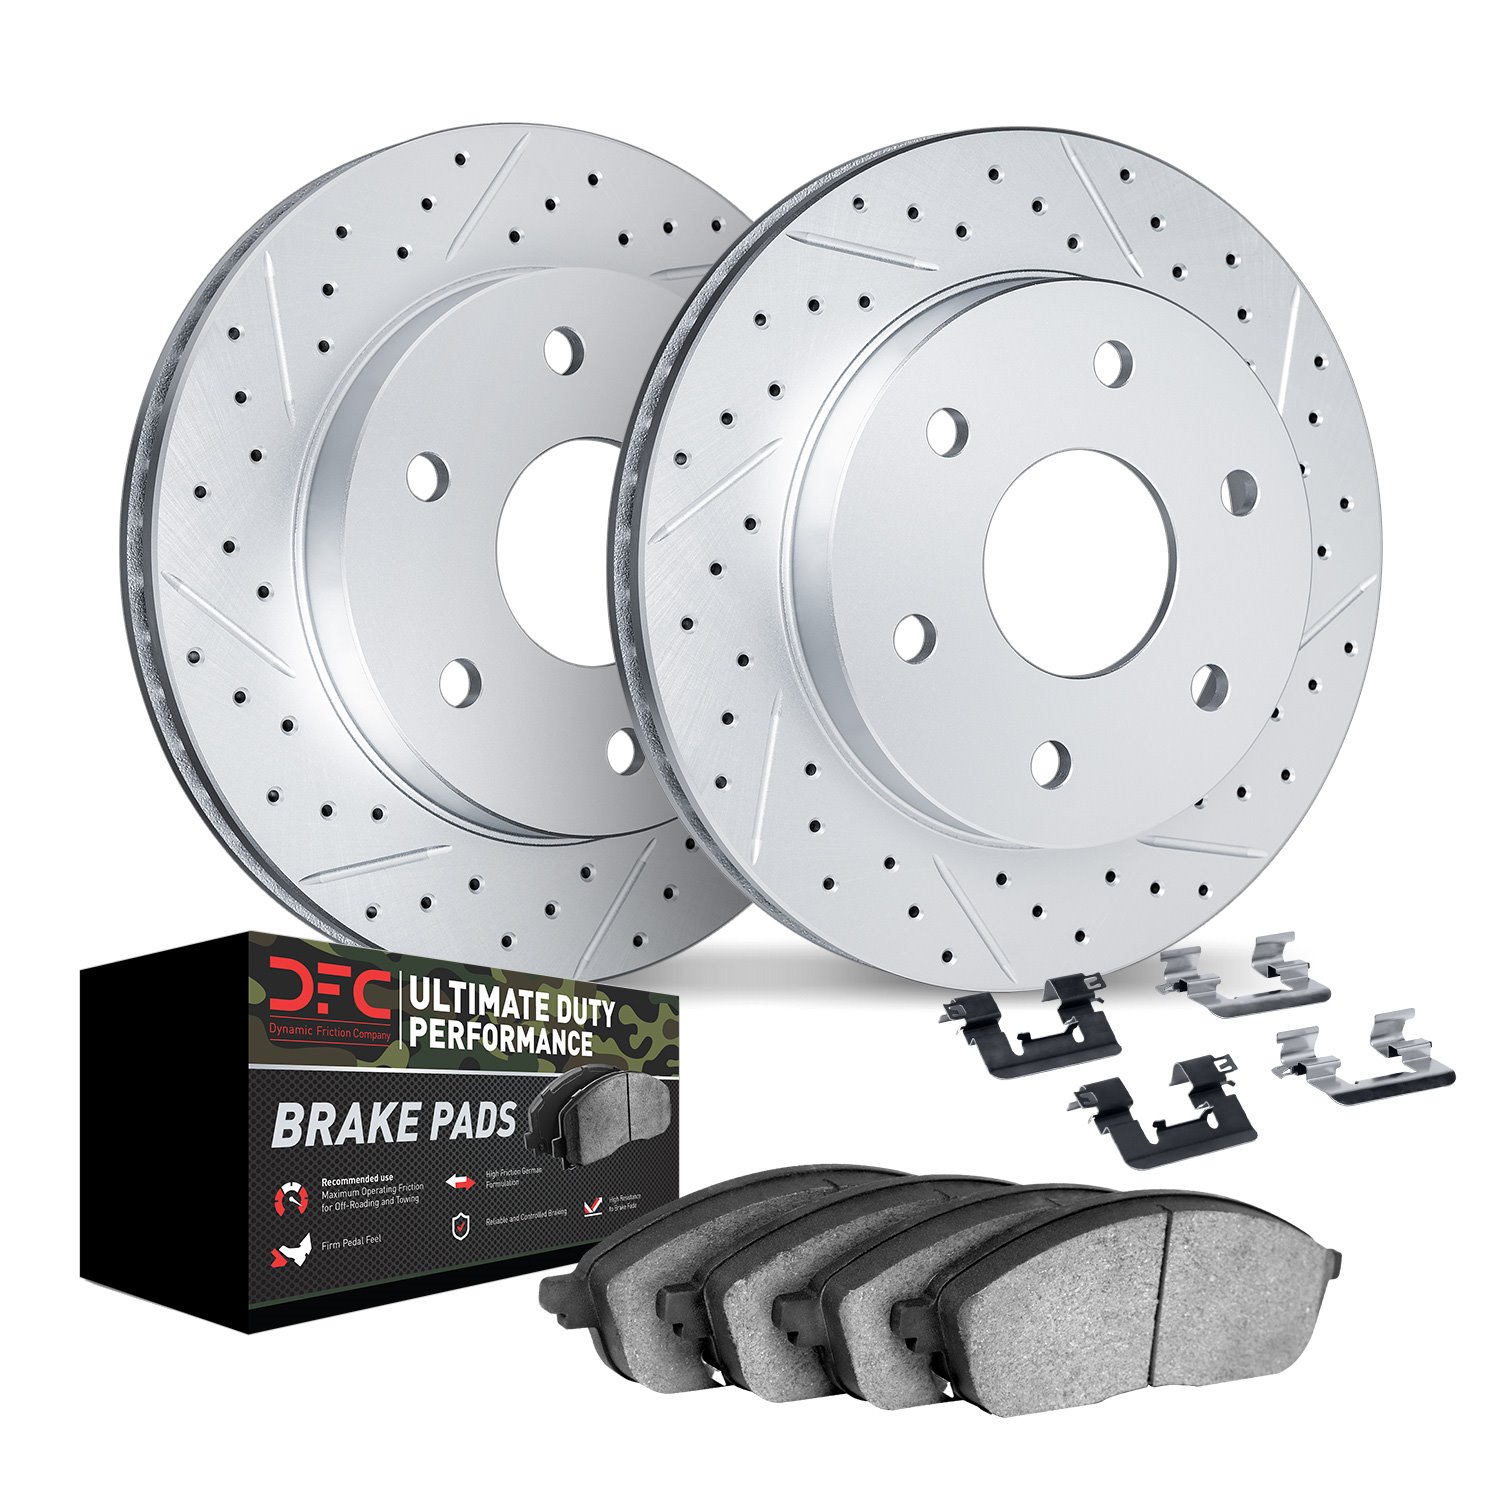 2412-48019 Geoperformance Drilled/Slotted Brake Rotors with Ultimate-Duty Brake Pads Kit & Hardware, 2002-2014 GM, Position: Rea